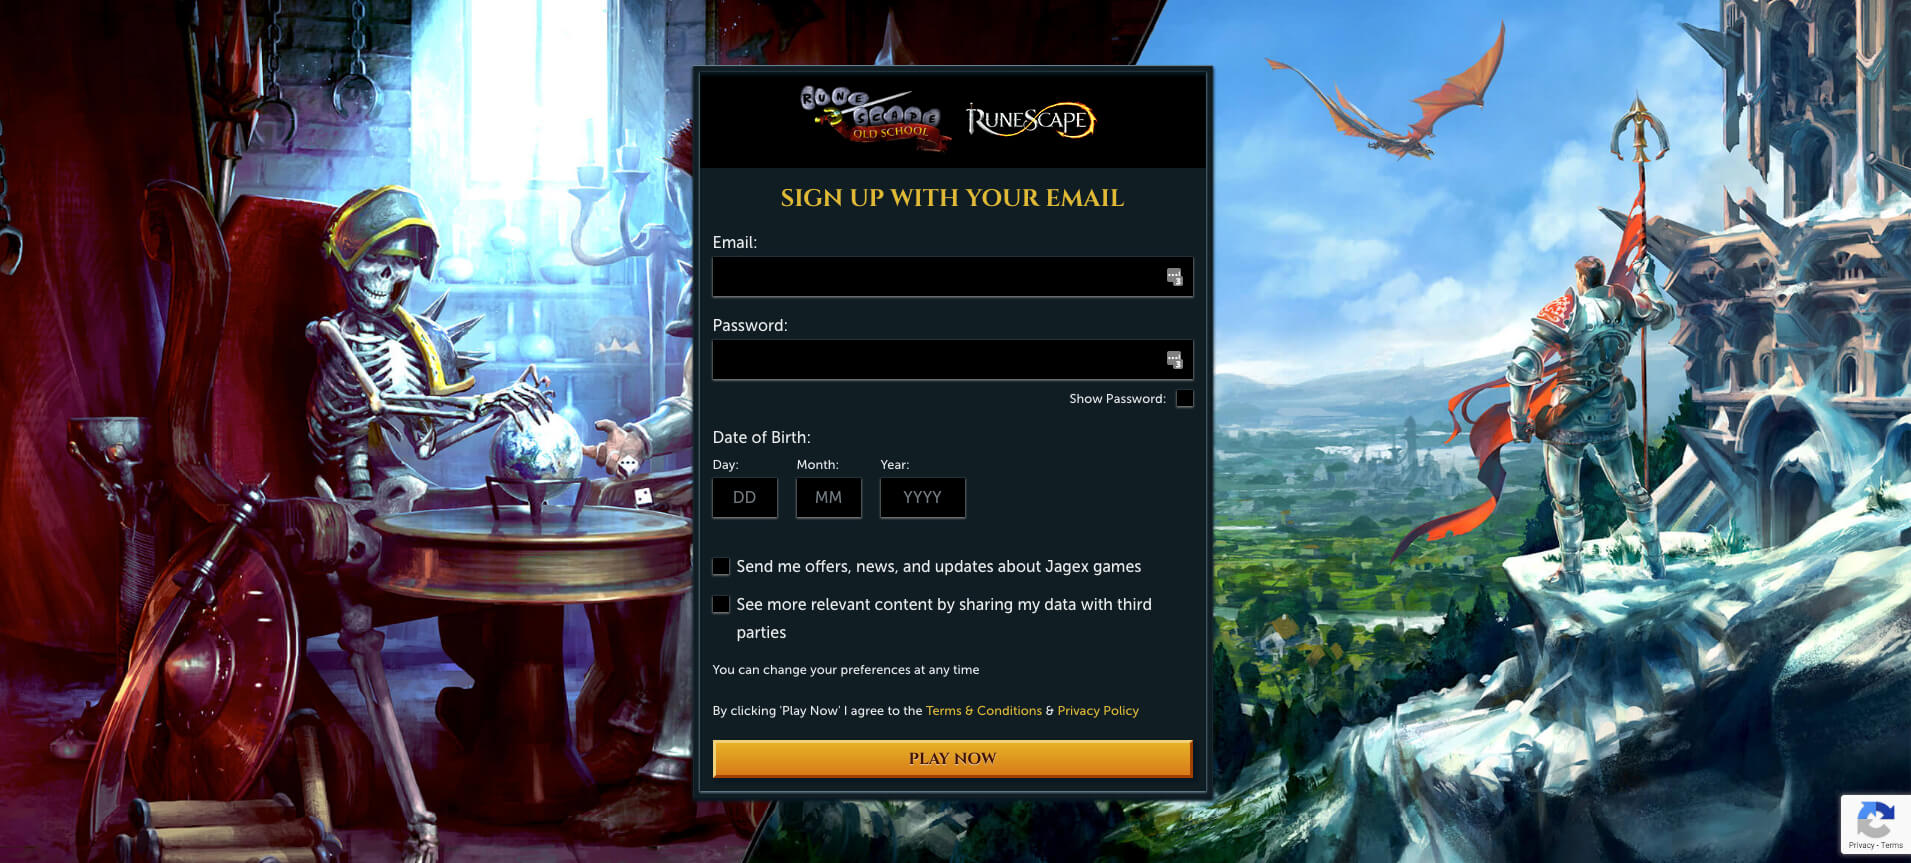 A screenshot of the RuneScape account creation page